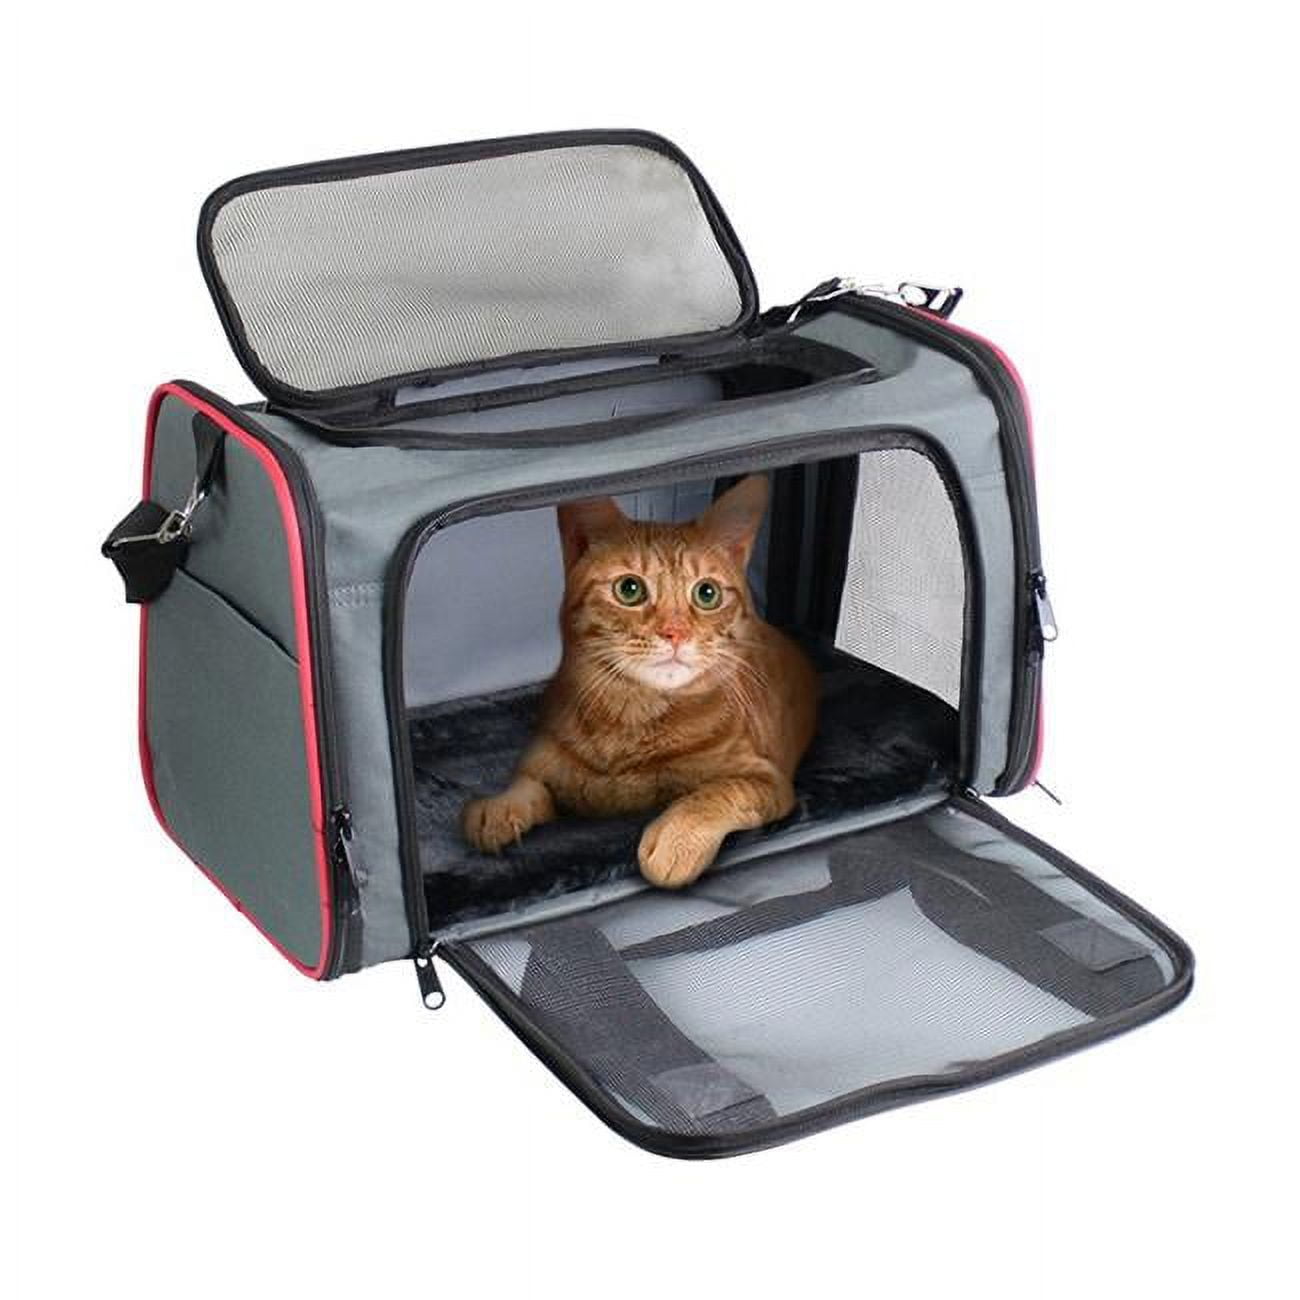 GAPZER Pet Carrier for Large Cats, Soft-Sided Cat Carrier for Medium Big  Cats and Puppy up to 20lbs, Washable Dog Carrier Privacy Protection for  Home